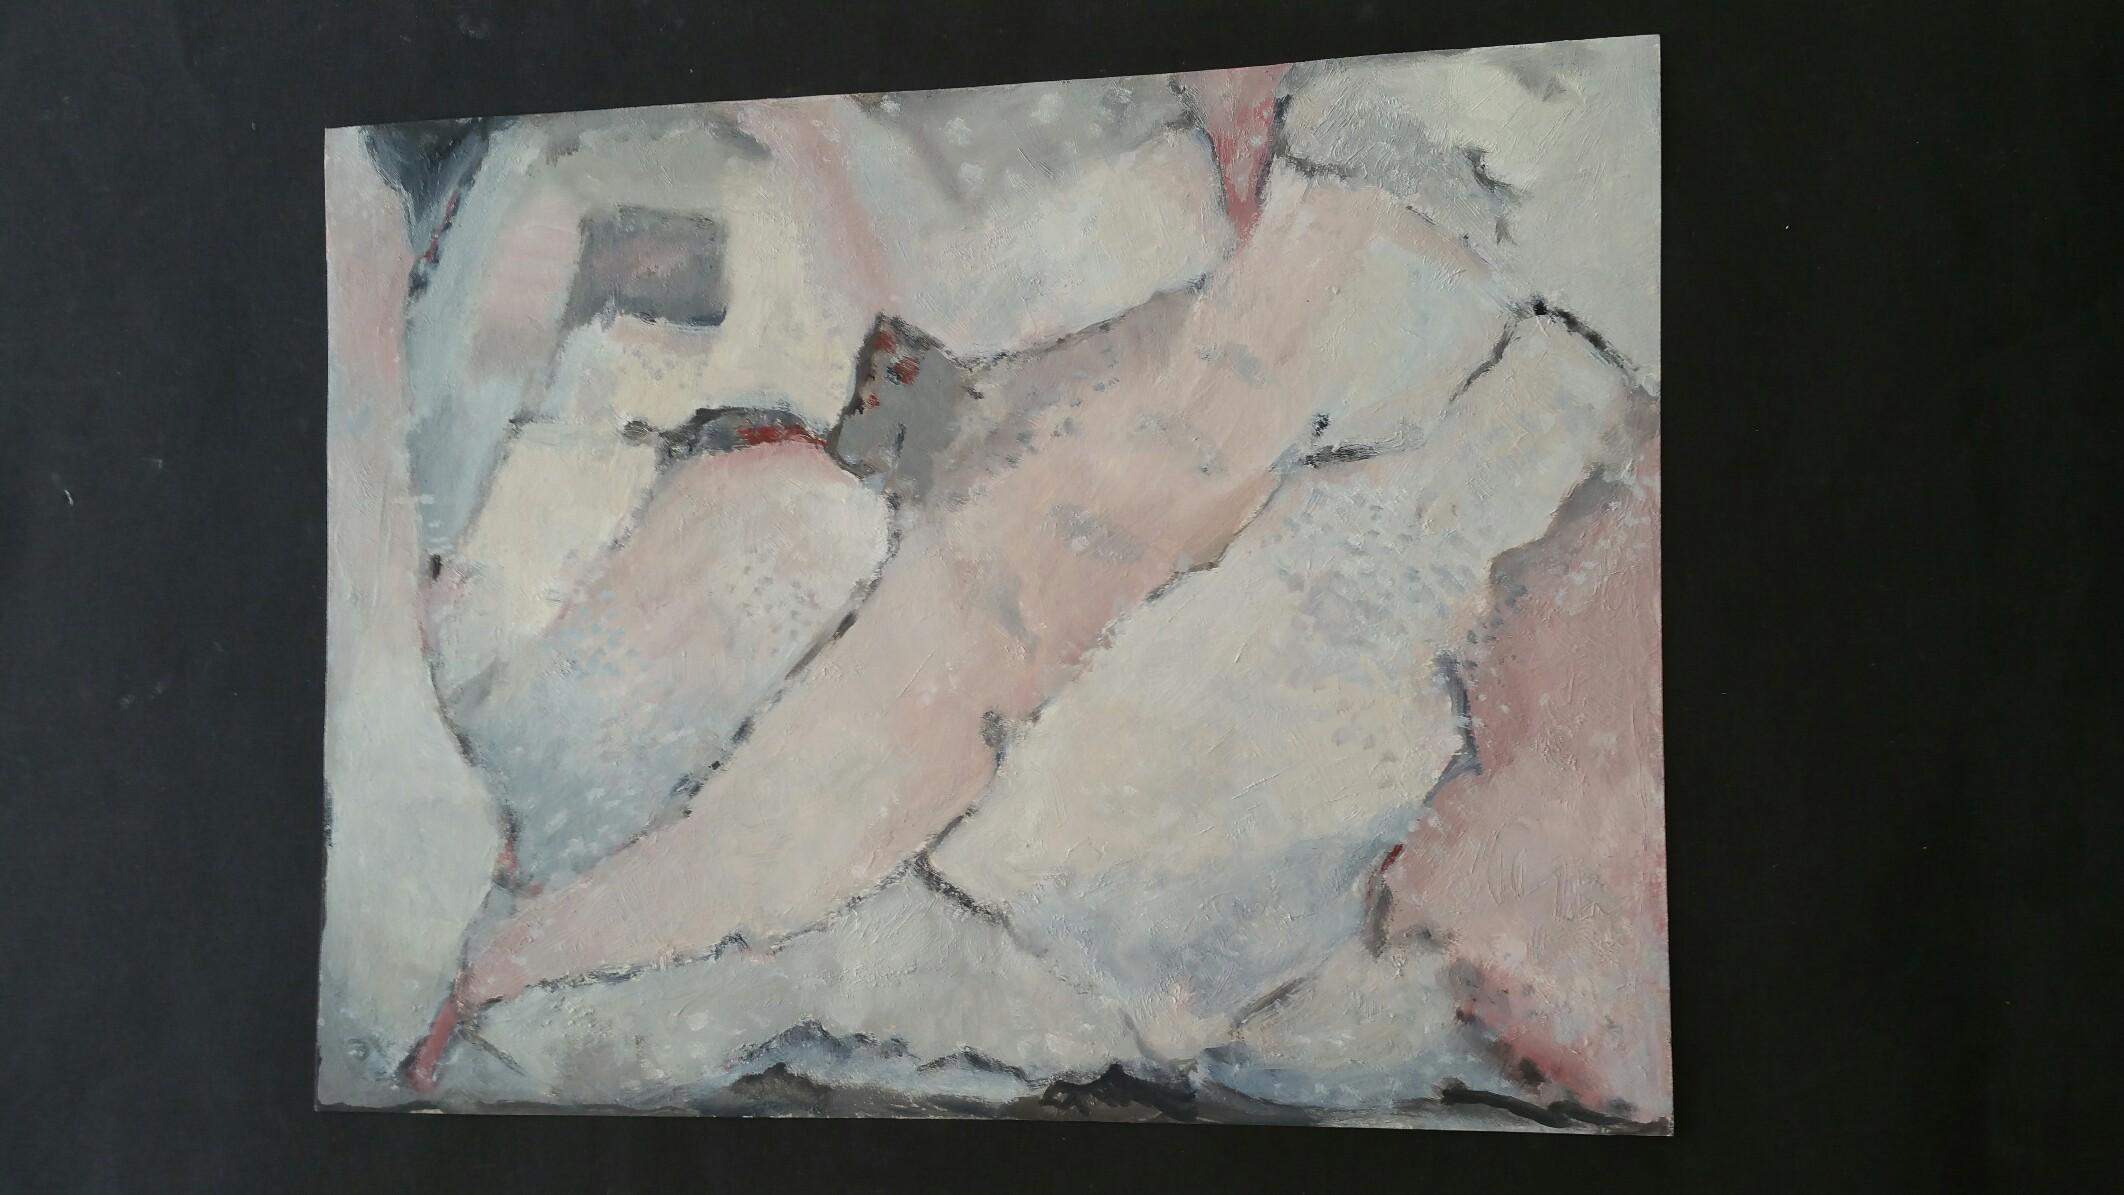 Parisian Abstract Expressionist Original Oil Painting - Neutrals and Pinks - Gray Abstract Painting by Yvette Dubois Habasque